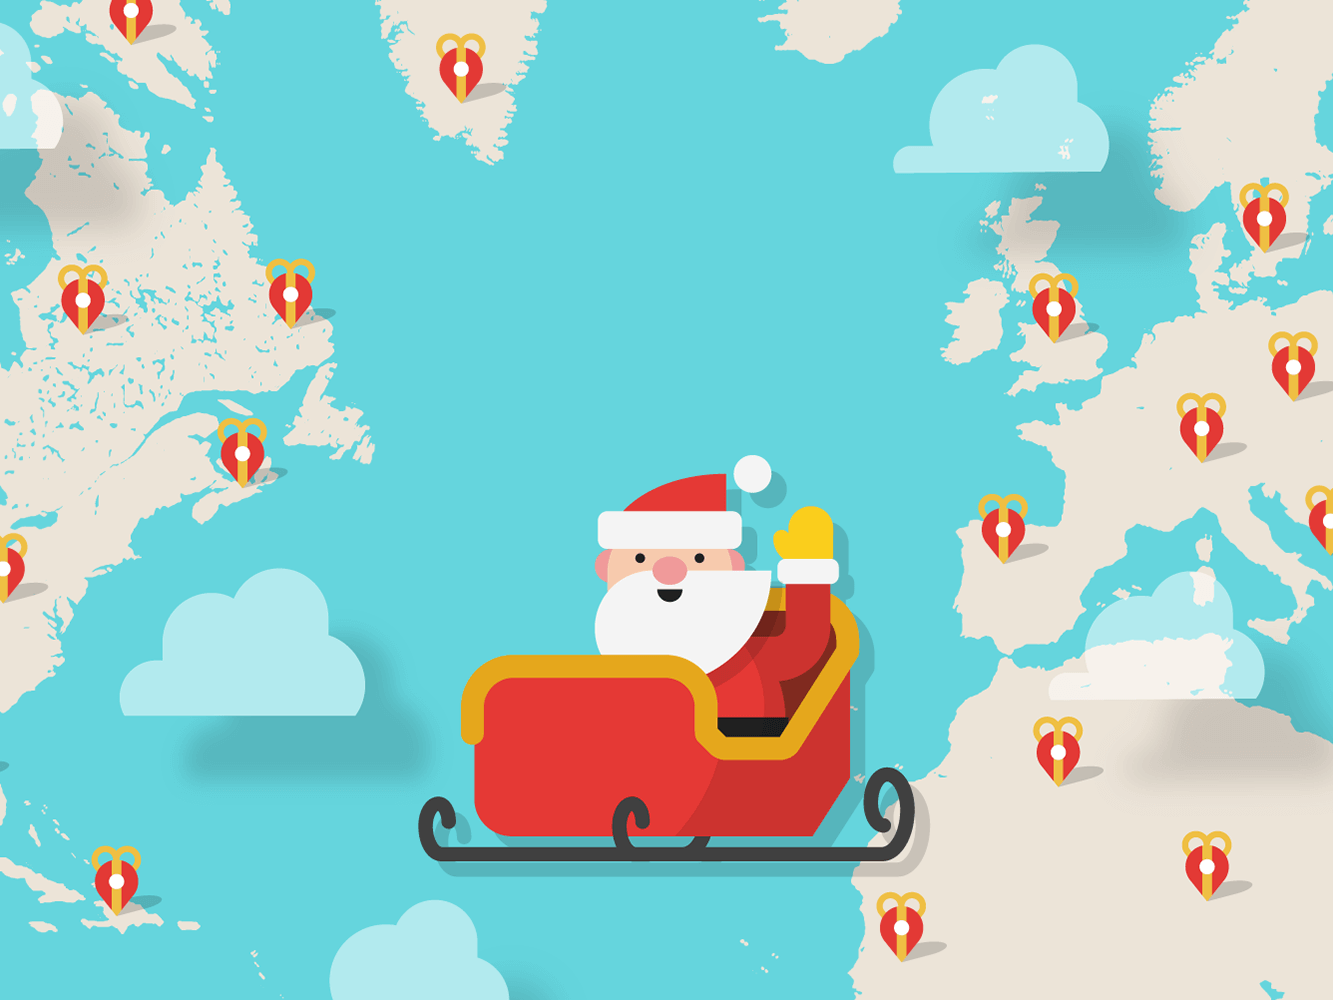 Google launched the traditional Santa Tracker, which will help track the movements of Santa Claus